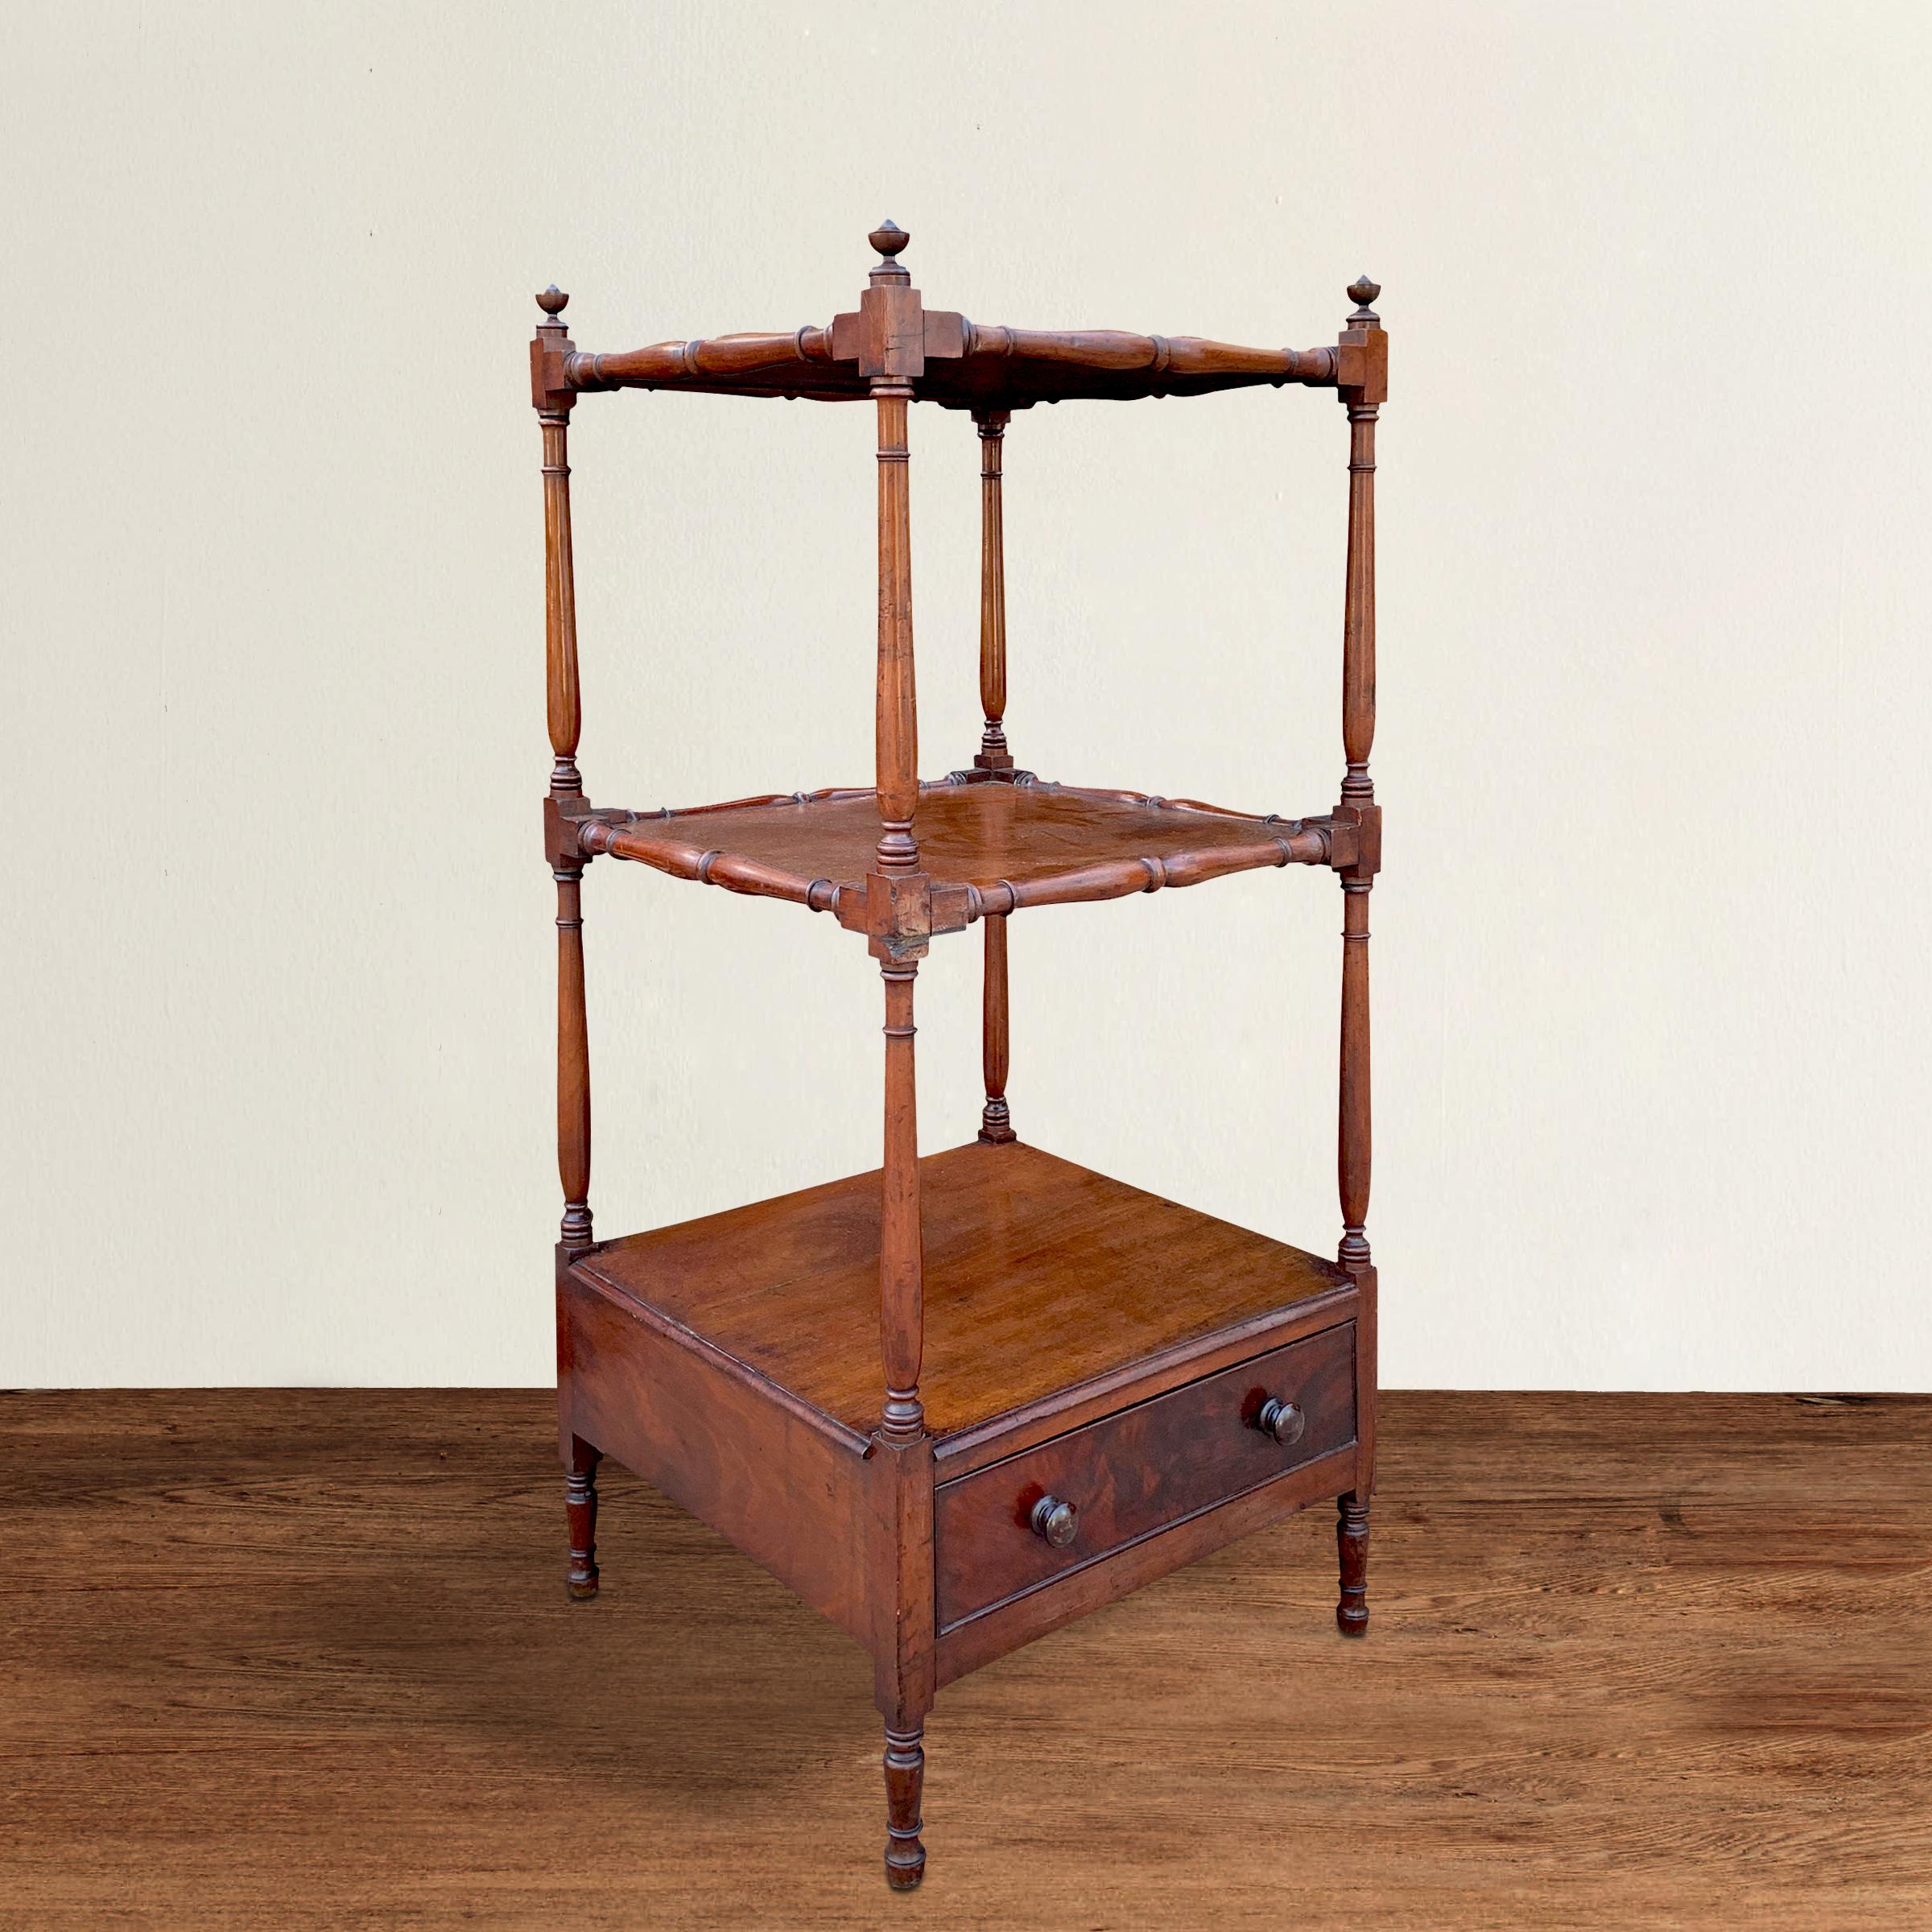 A fantastic 19th century English mahogany whatnot, or tired stand, with beautifully turned supports mimicking columns, with turned frames supporting solid mahogany shelves, and a lower drawer with a crotch mahogany front and two knobs. Shelf is